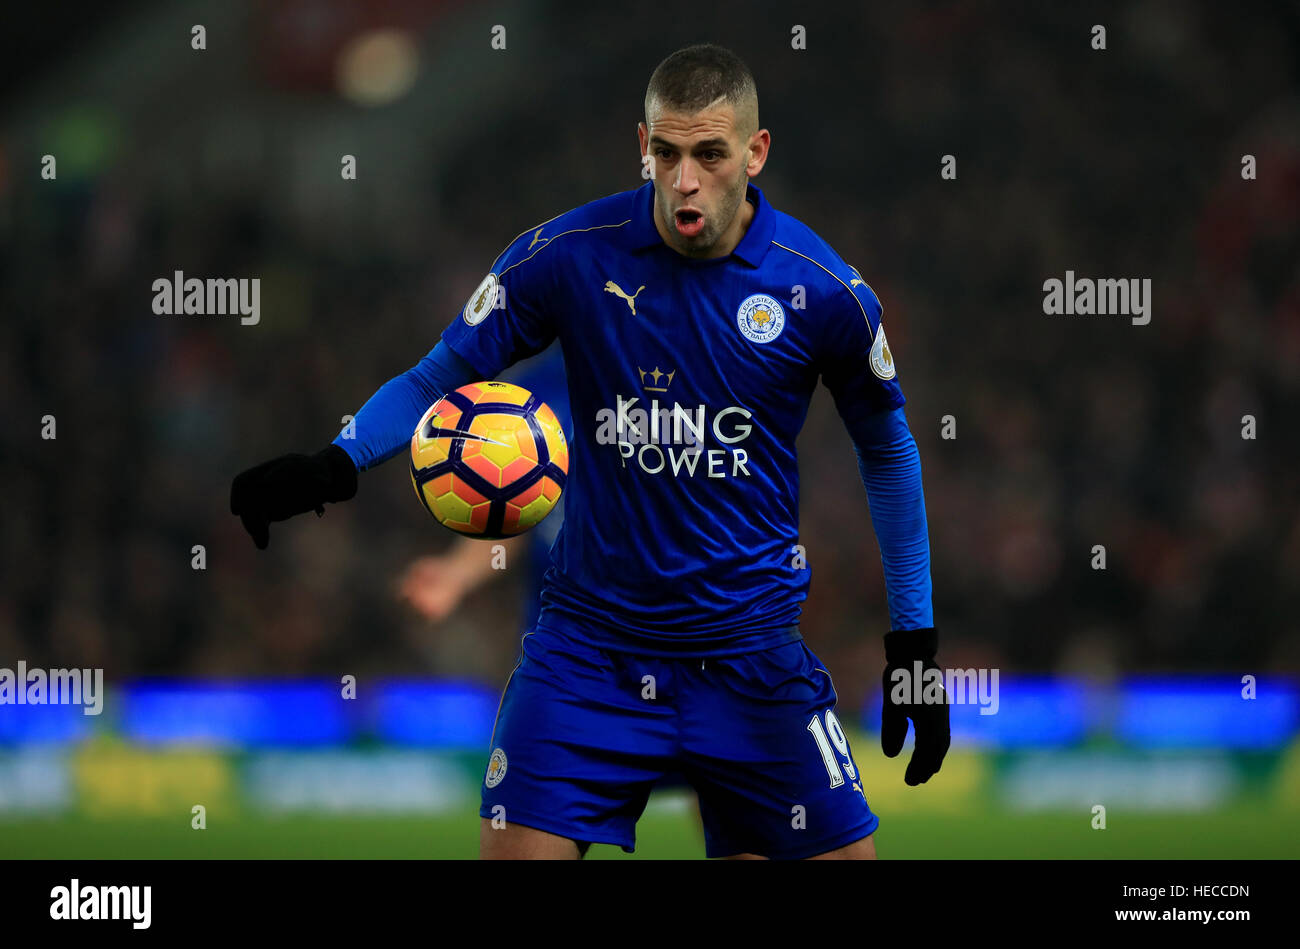 Leicester City's Islam Slimani Banque D'Images